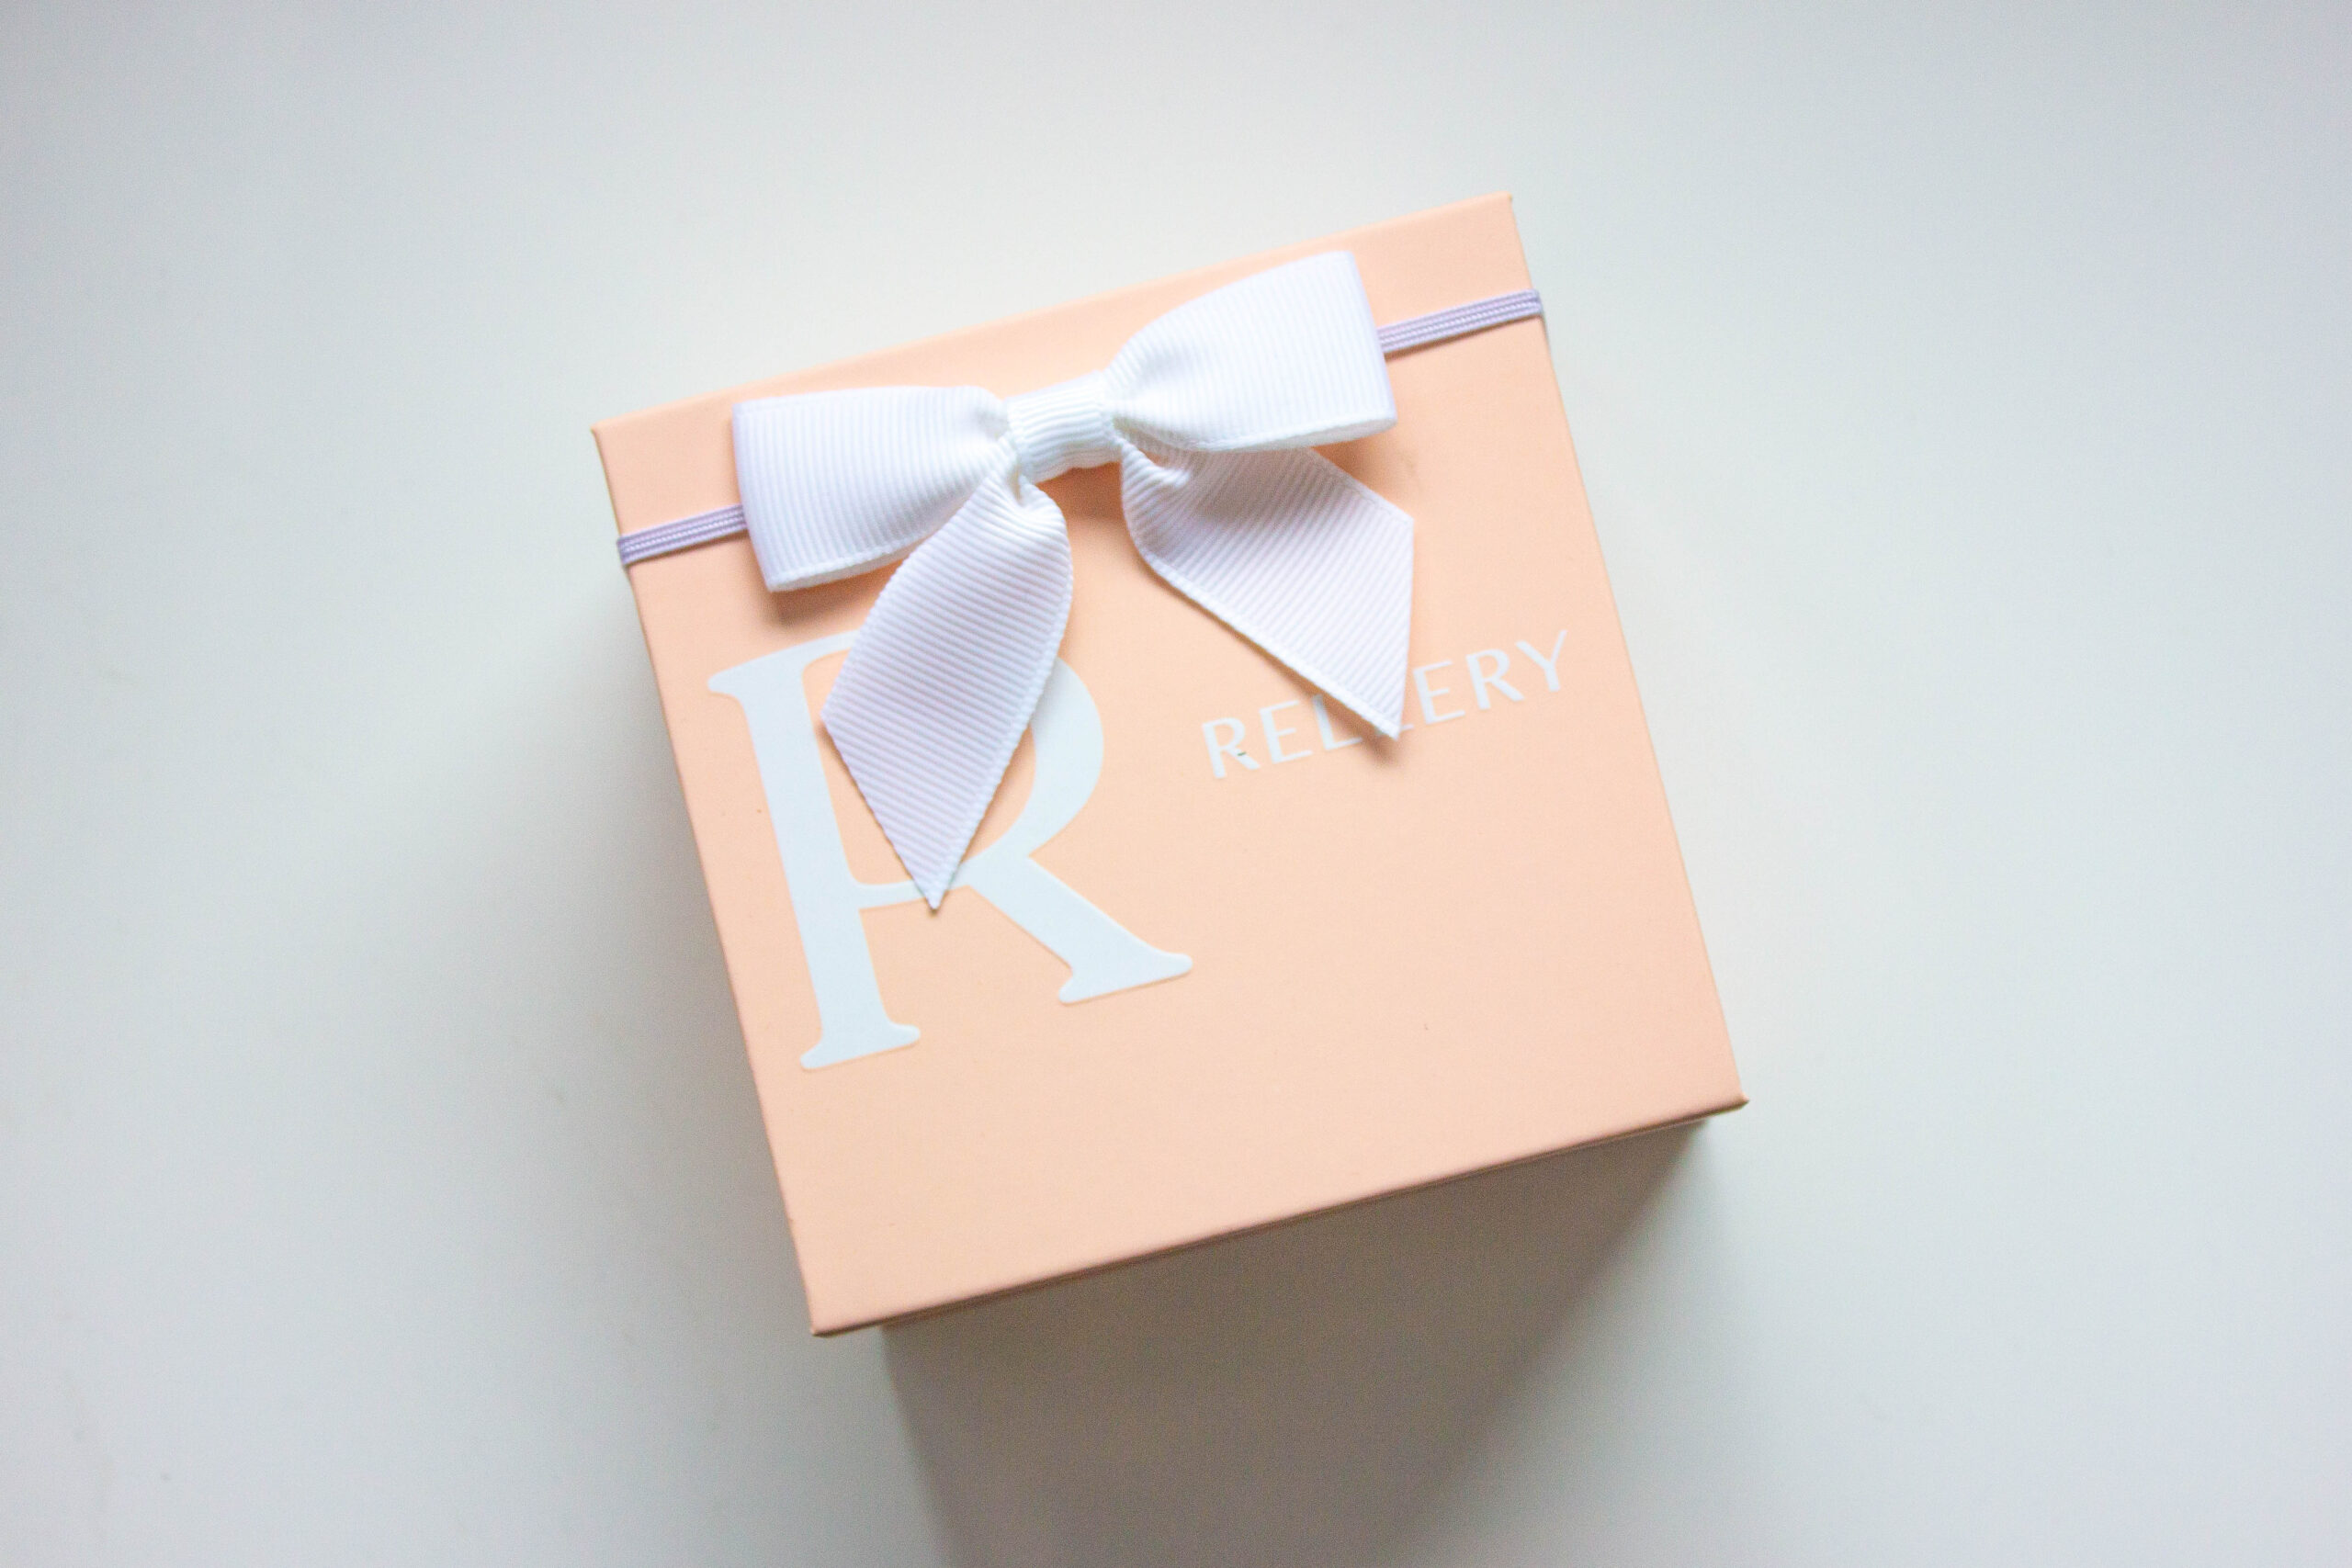 Rellery Jewelry Box with bow